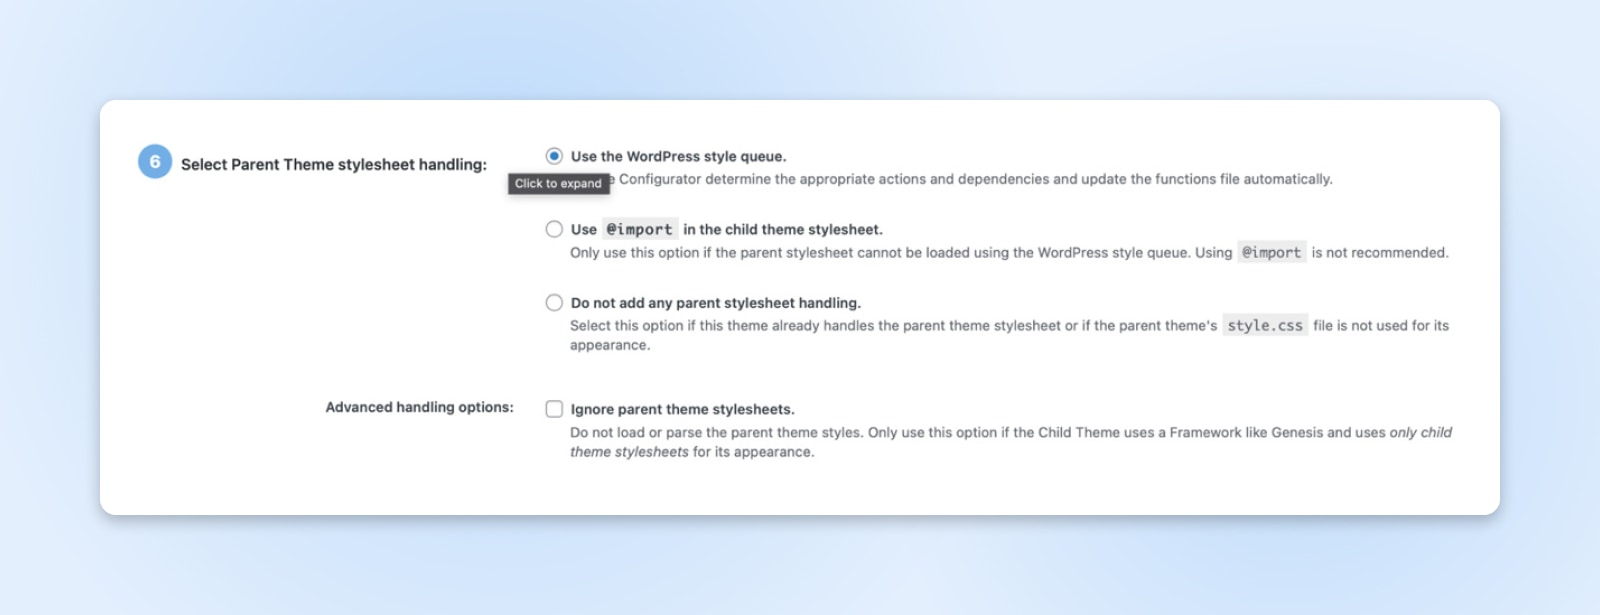 step 6: select parent theme stylesheet handling with "use the wordpress style queue" selected 